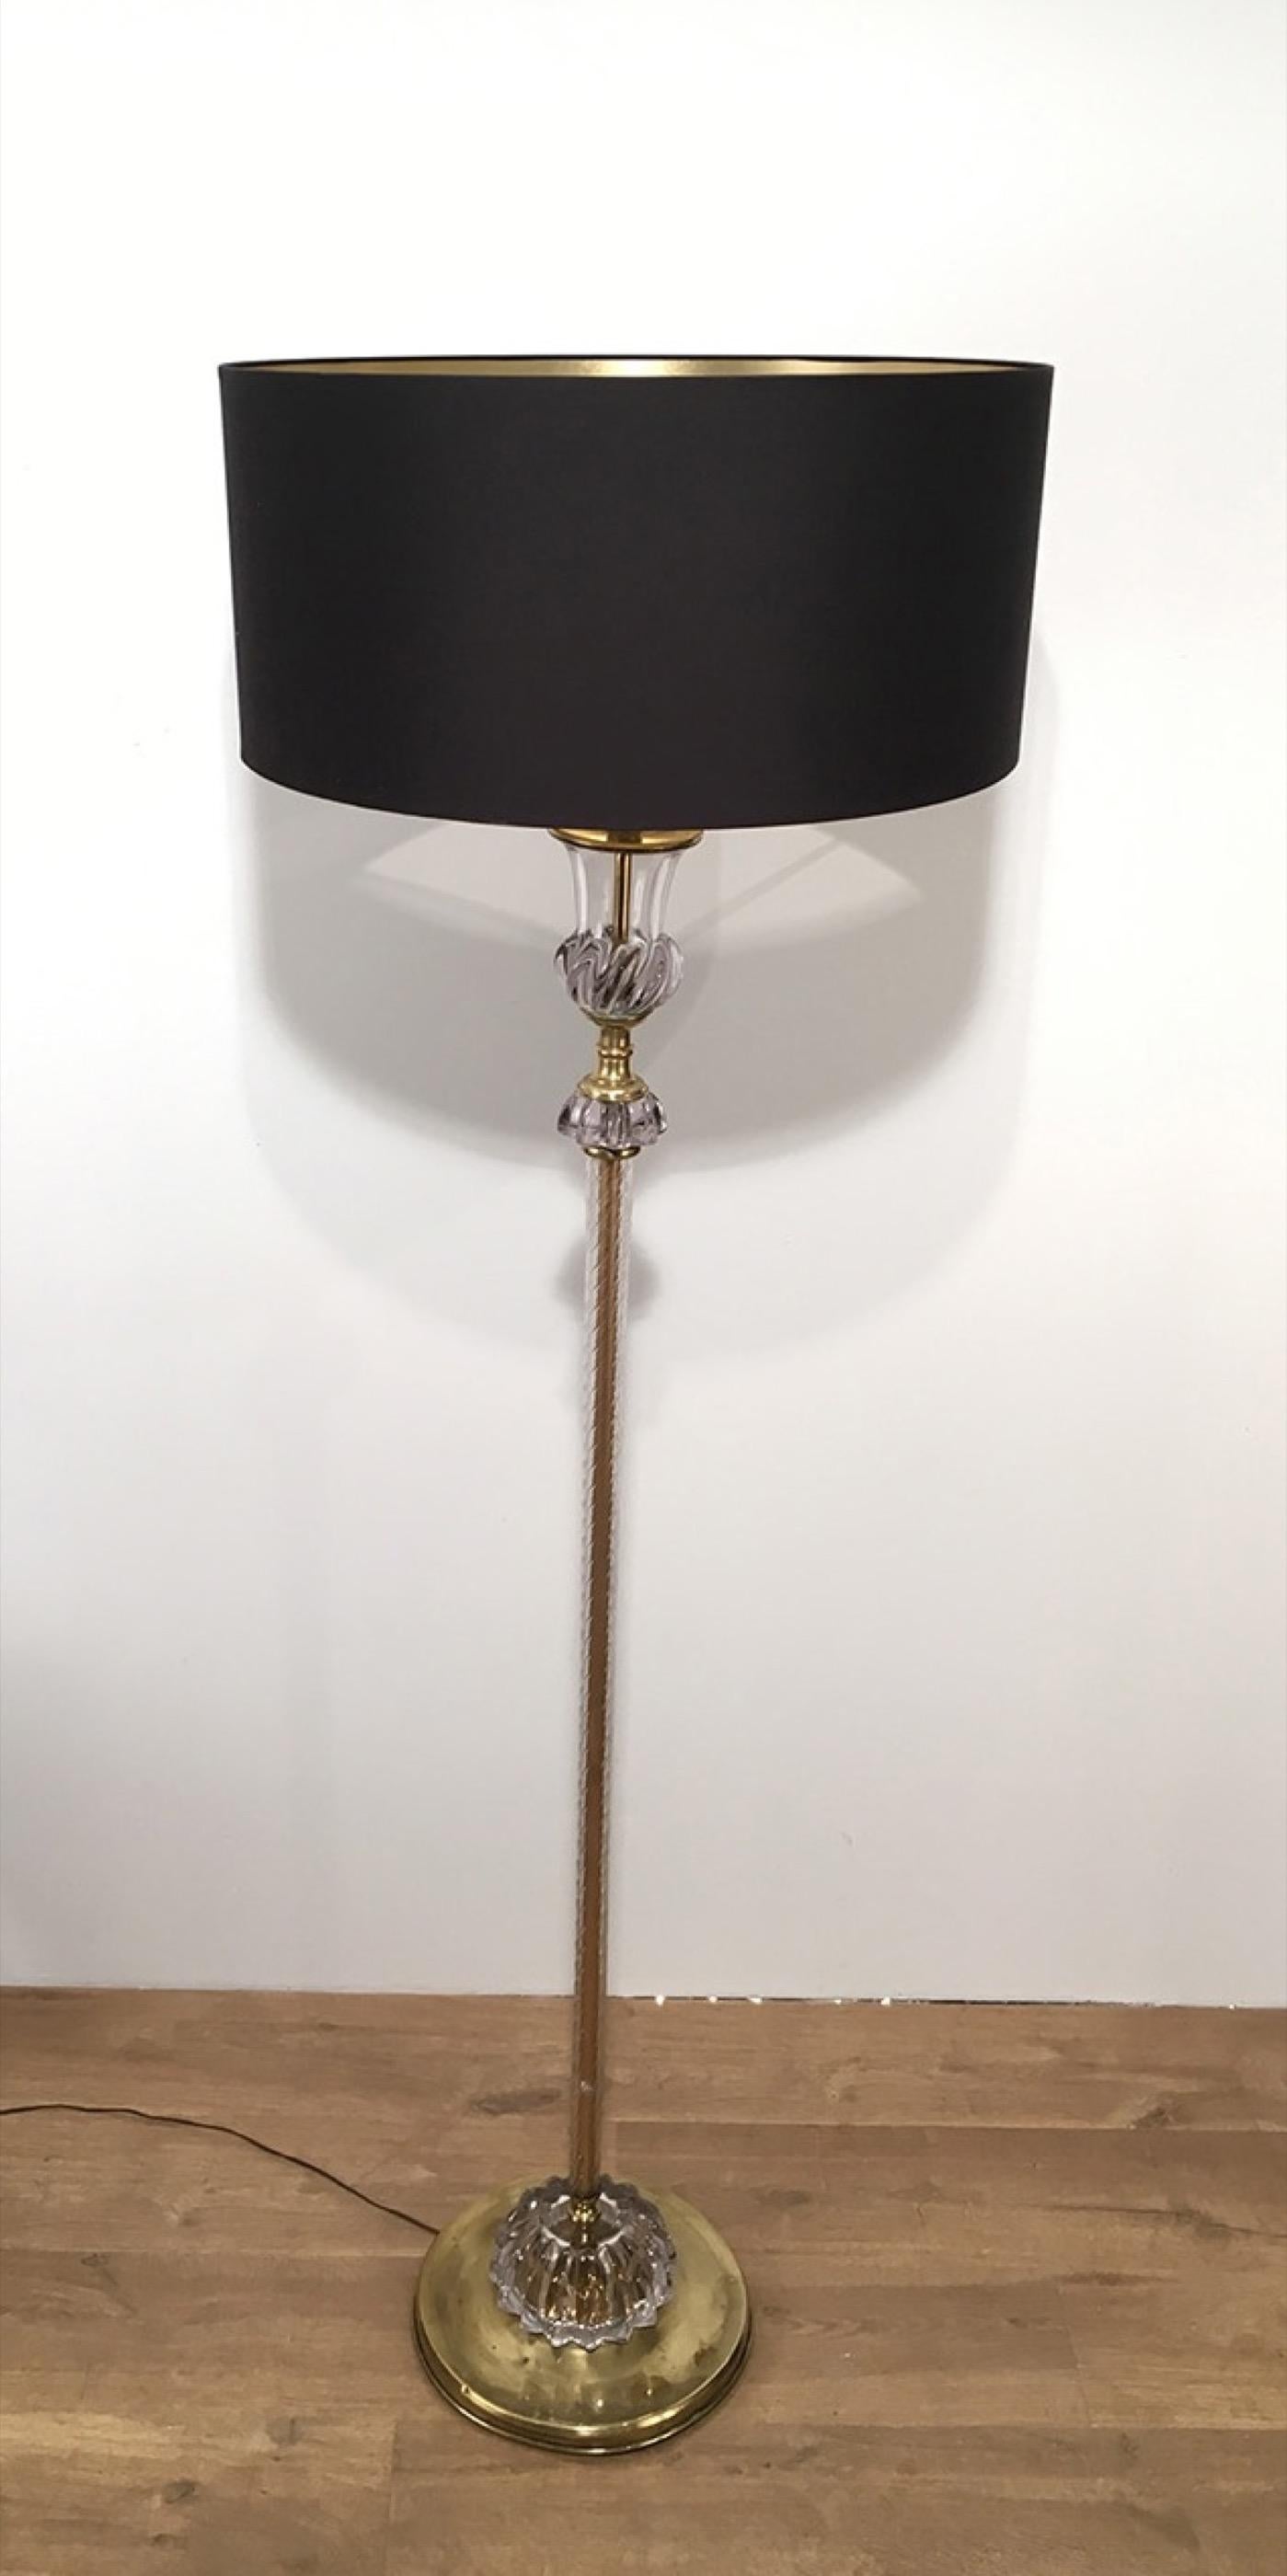 Attributed to Barovier & Toso, Murano Glass Floor Lamp, circa 1940 For Sale 5